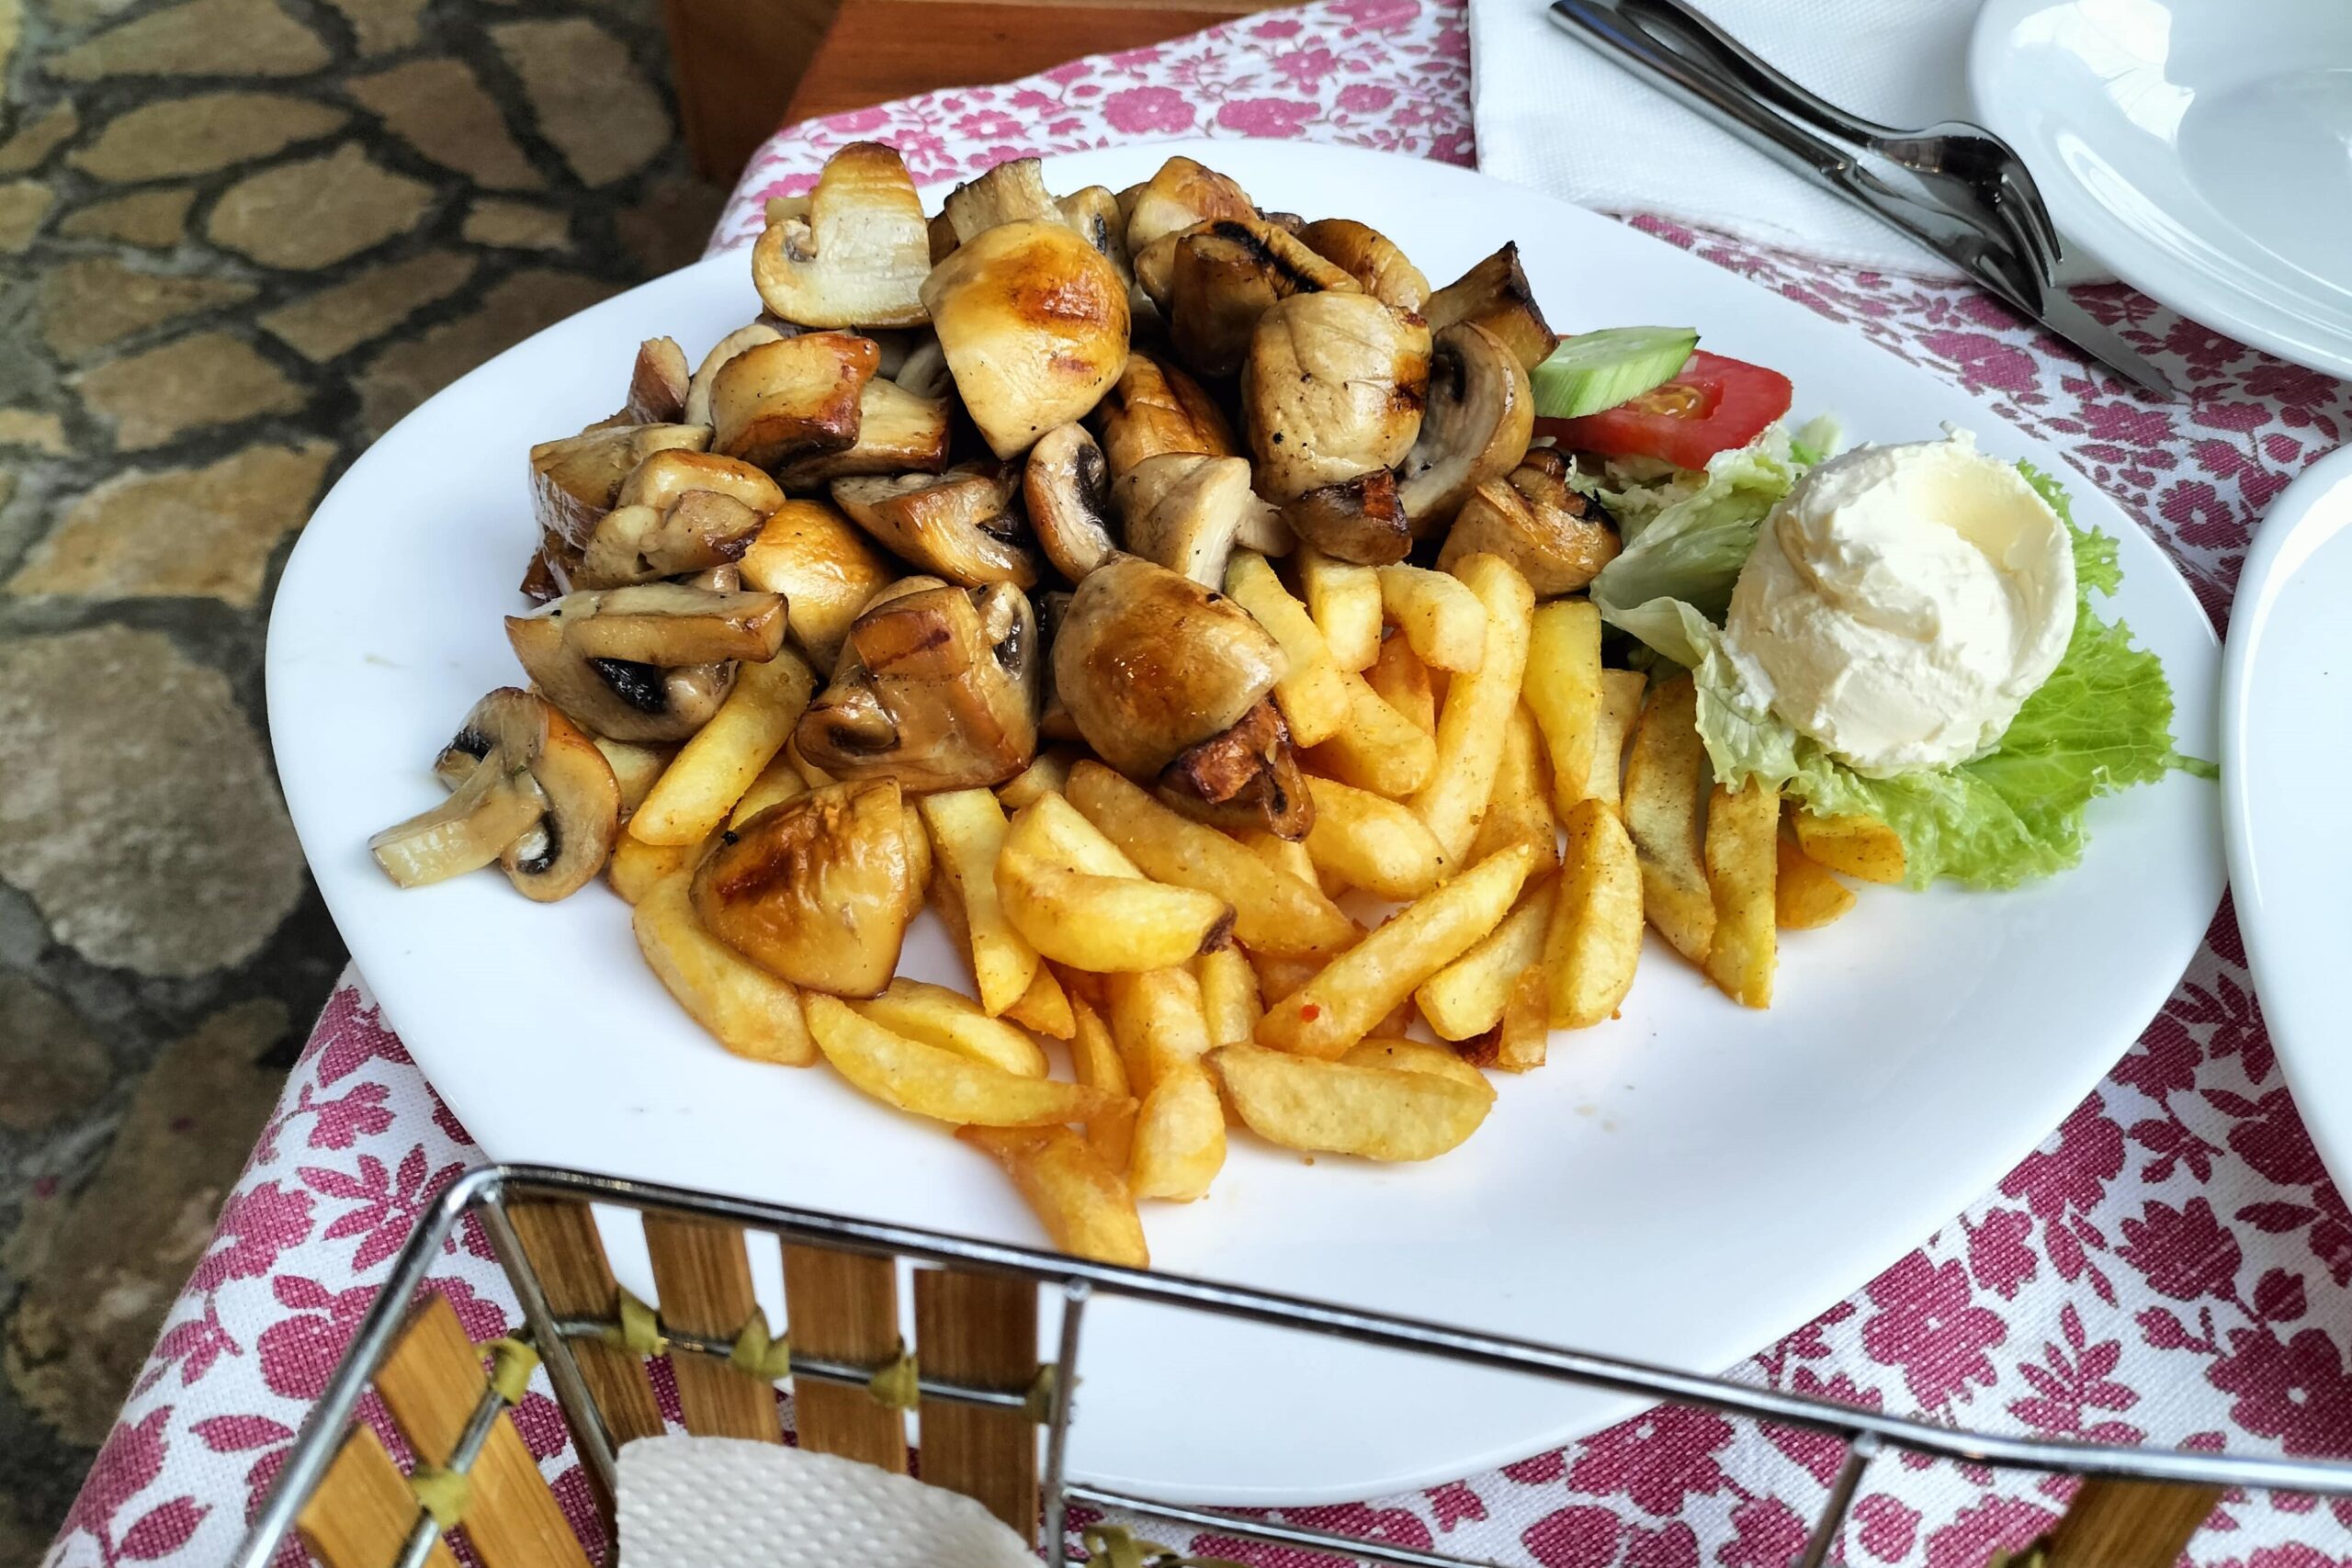 Barbecued mushrooms and chips with sour cream